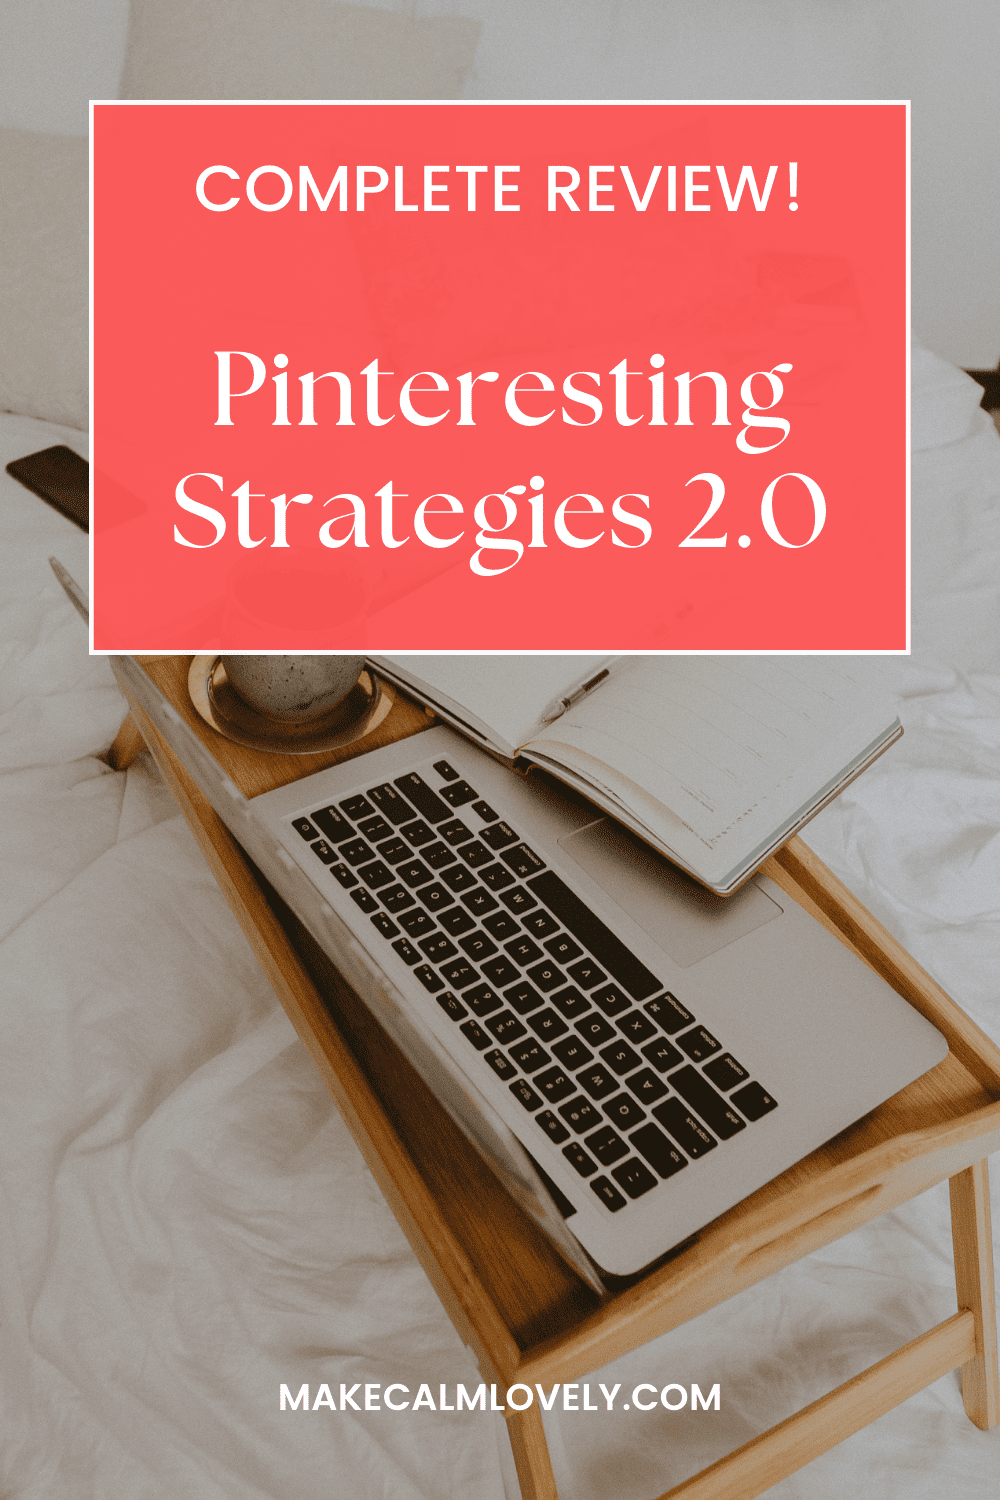 Pinteresting Strategies Pinterest Course 2.0: Honest Review 2023 (+ My free gift to you!)